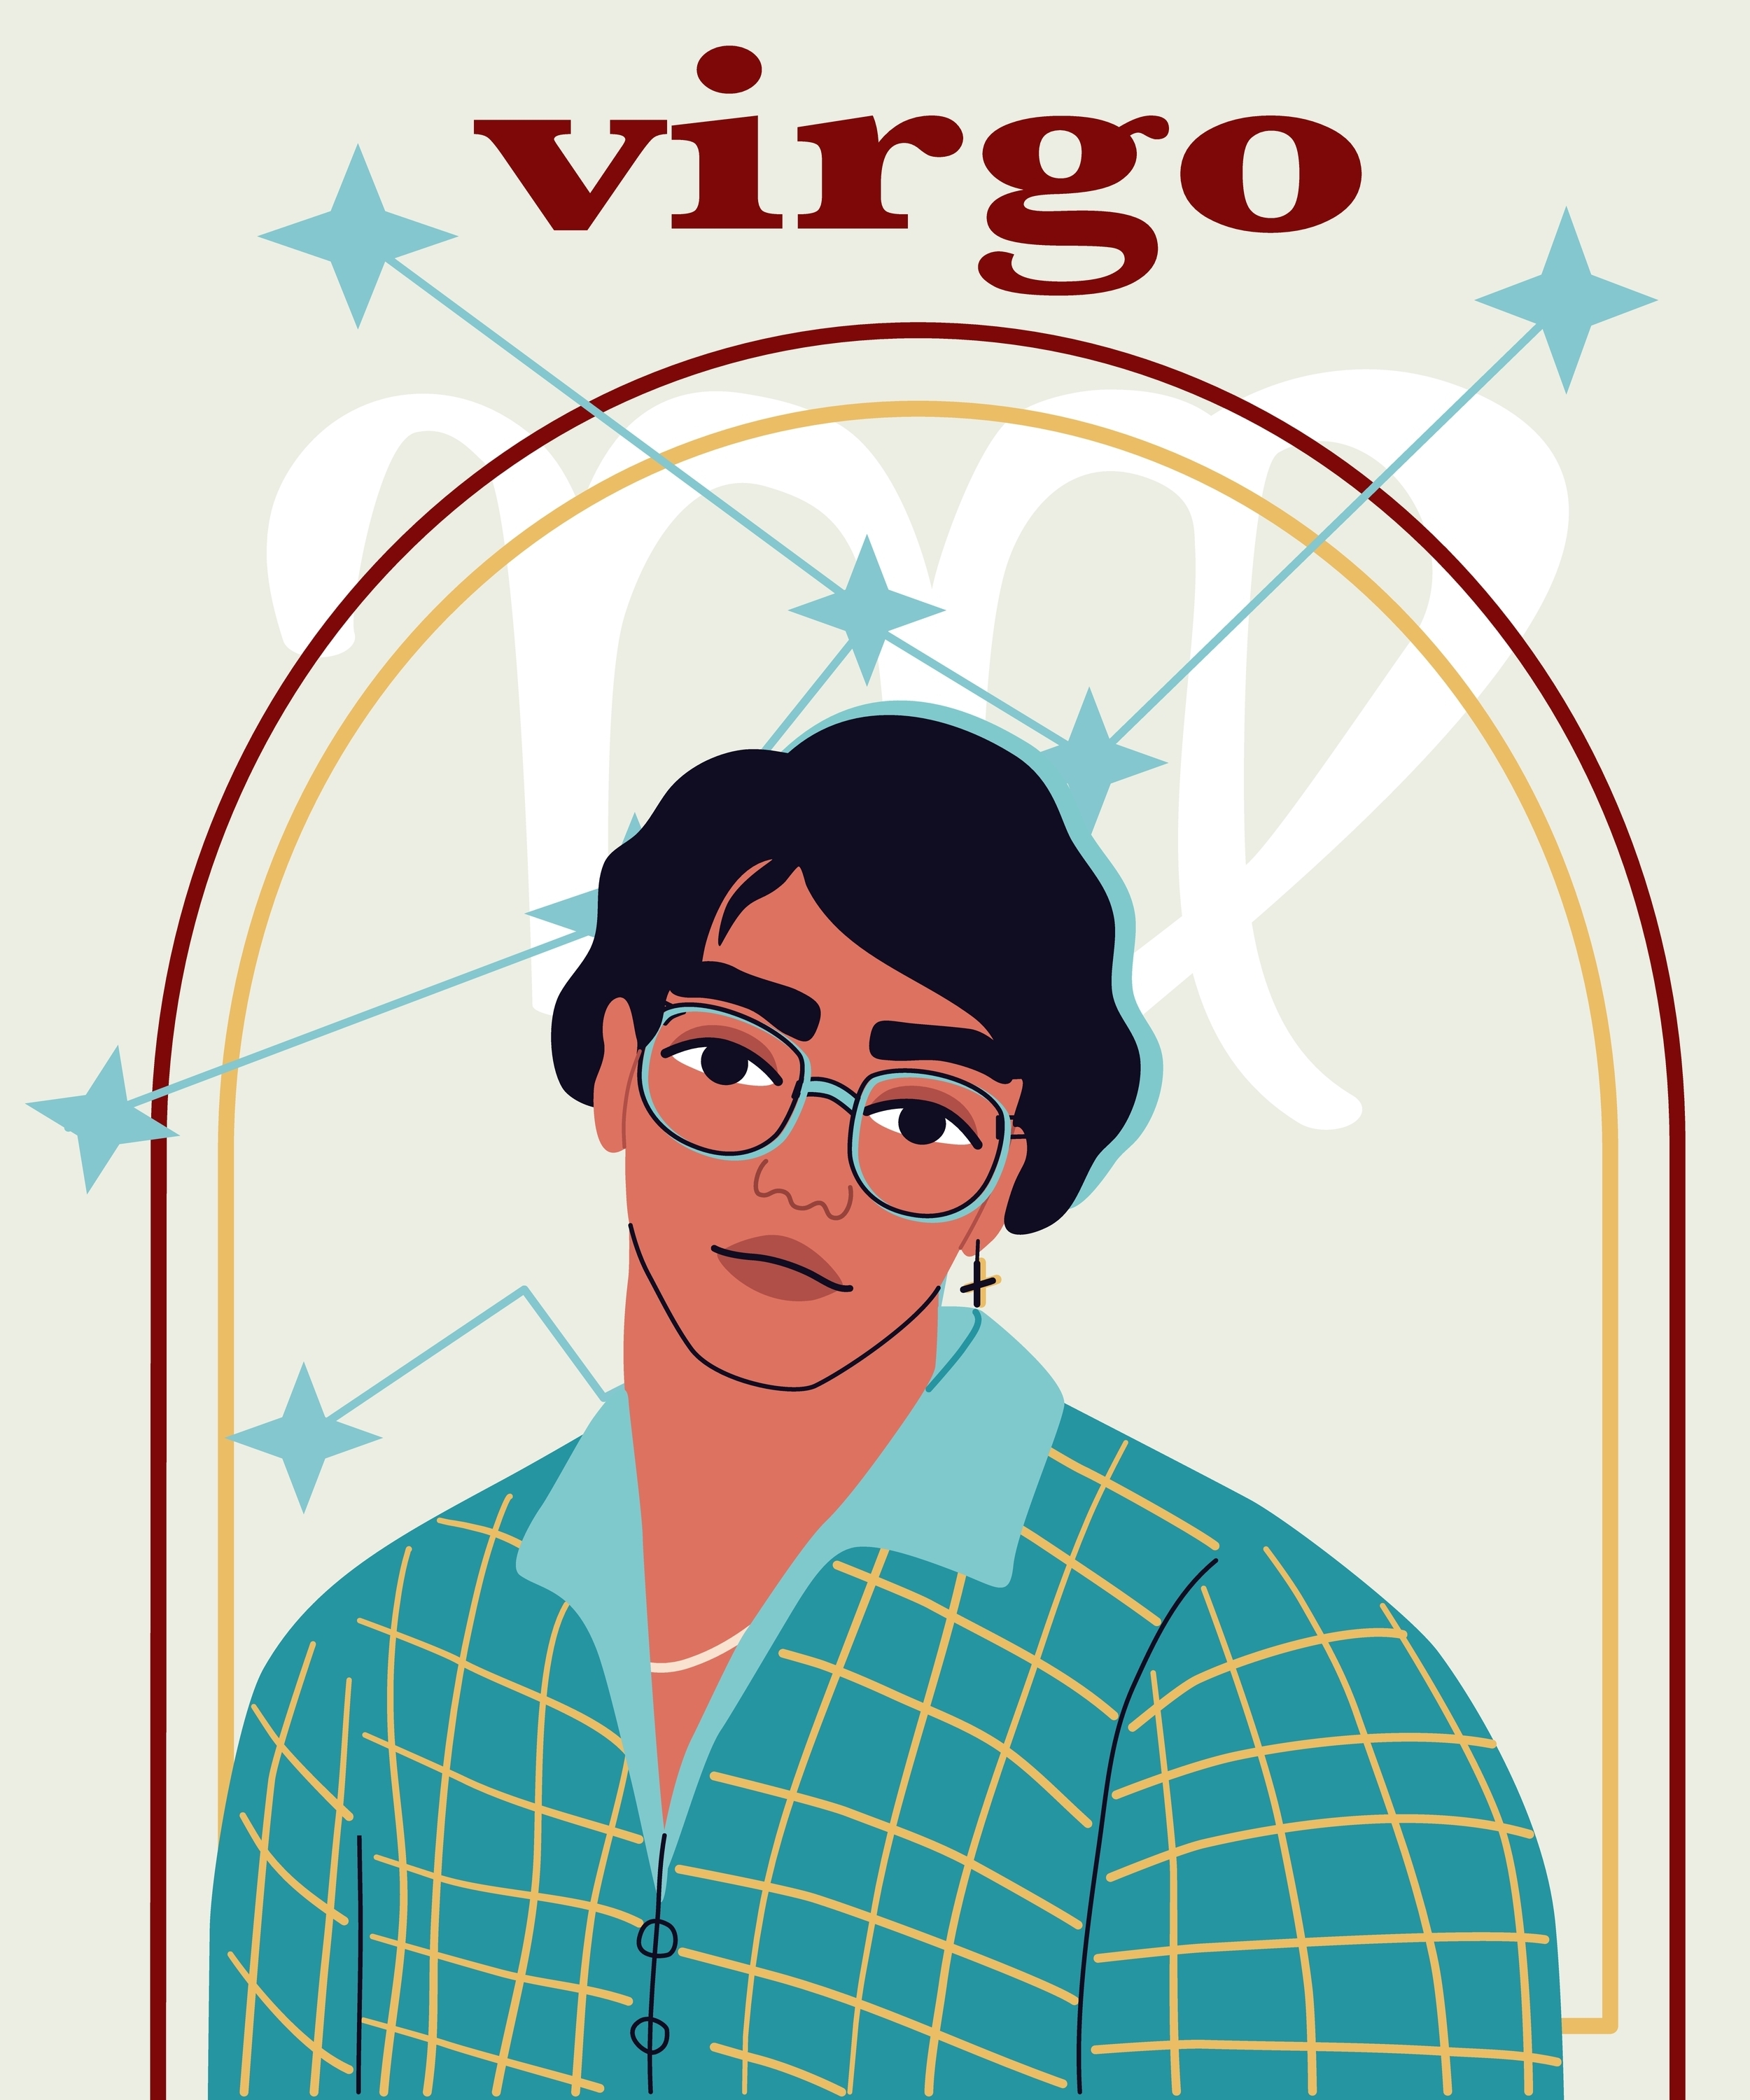 An illustration of a Virgo man posing against his Zodiac symbol and constellation | Source: Shutterstock